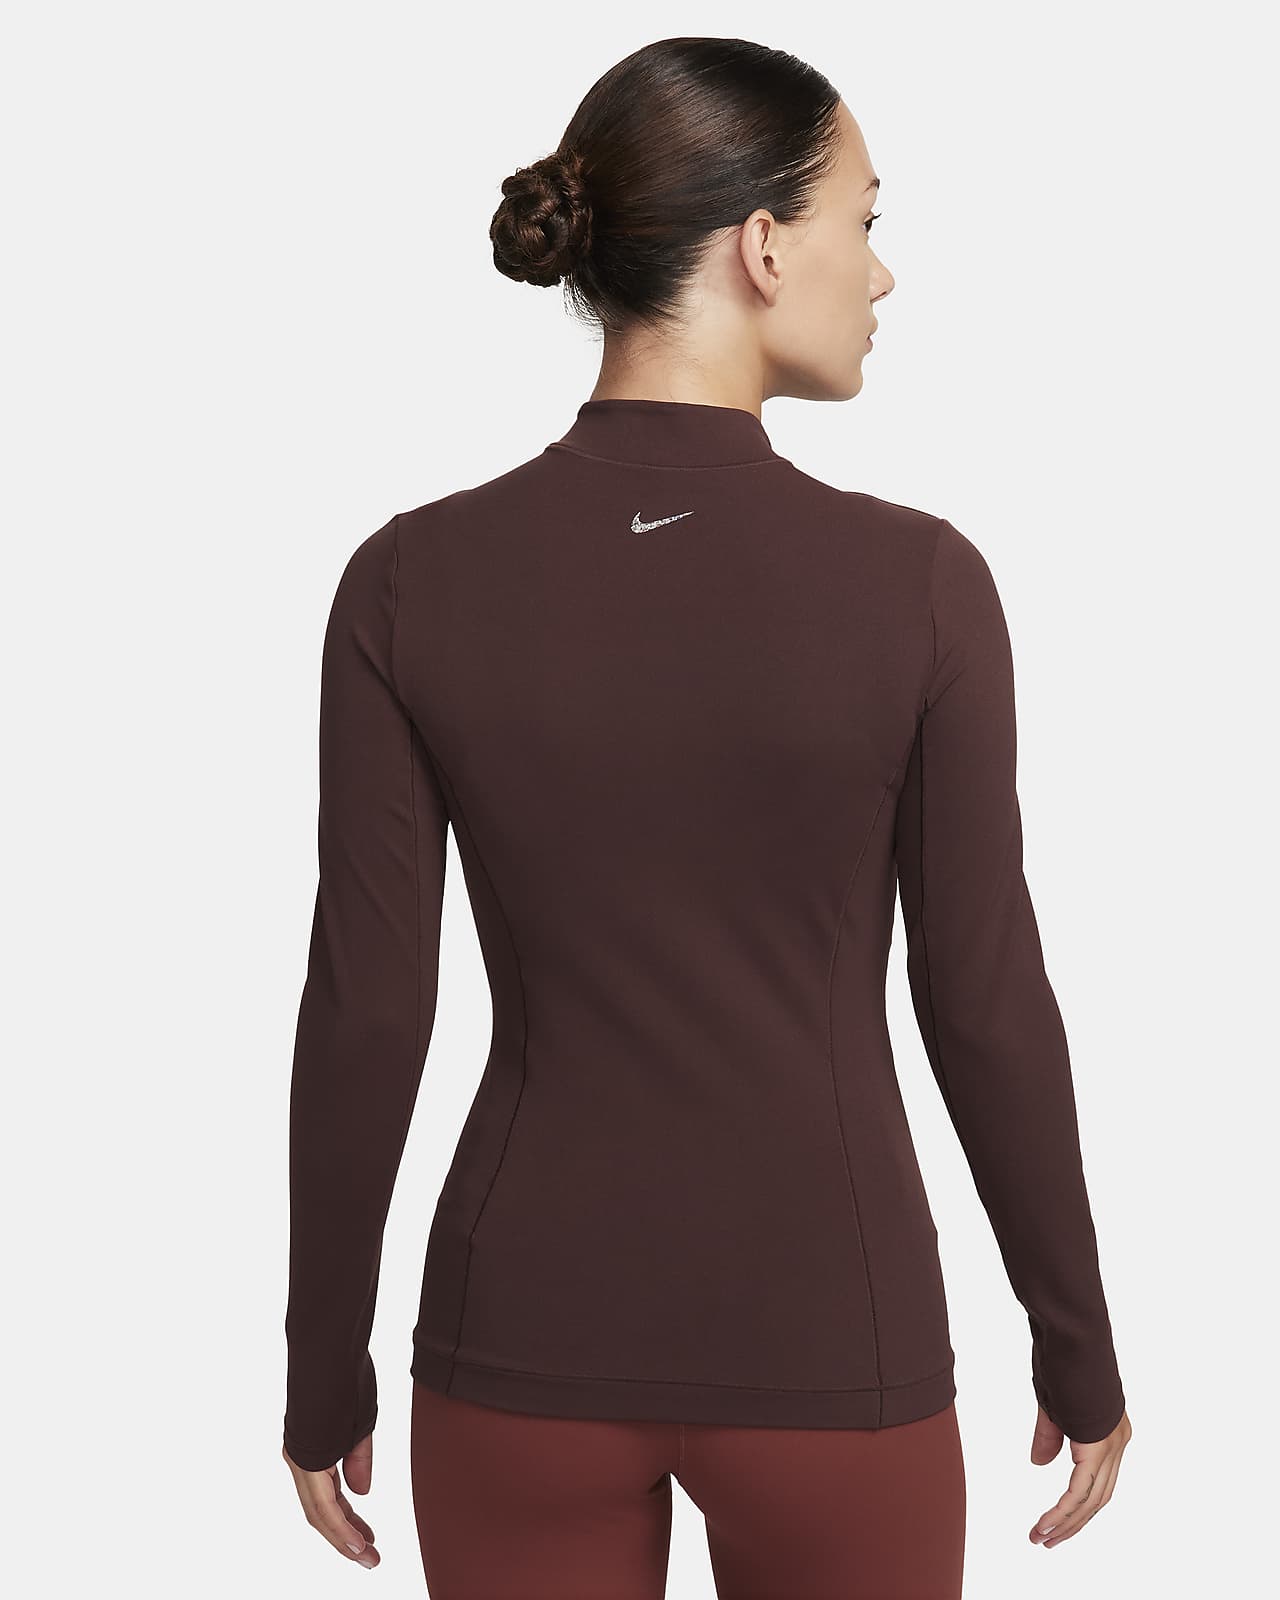 Nike Yoga Dri-FIT Luxe Women's Fitted Jacket.